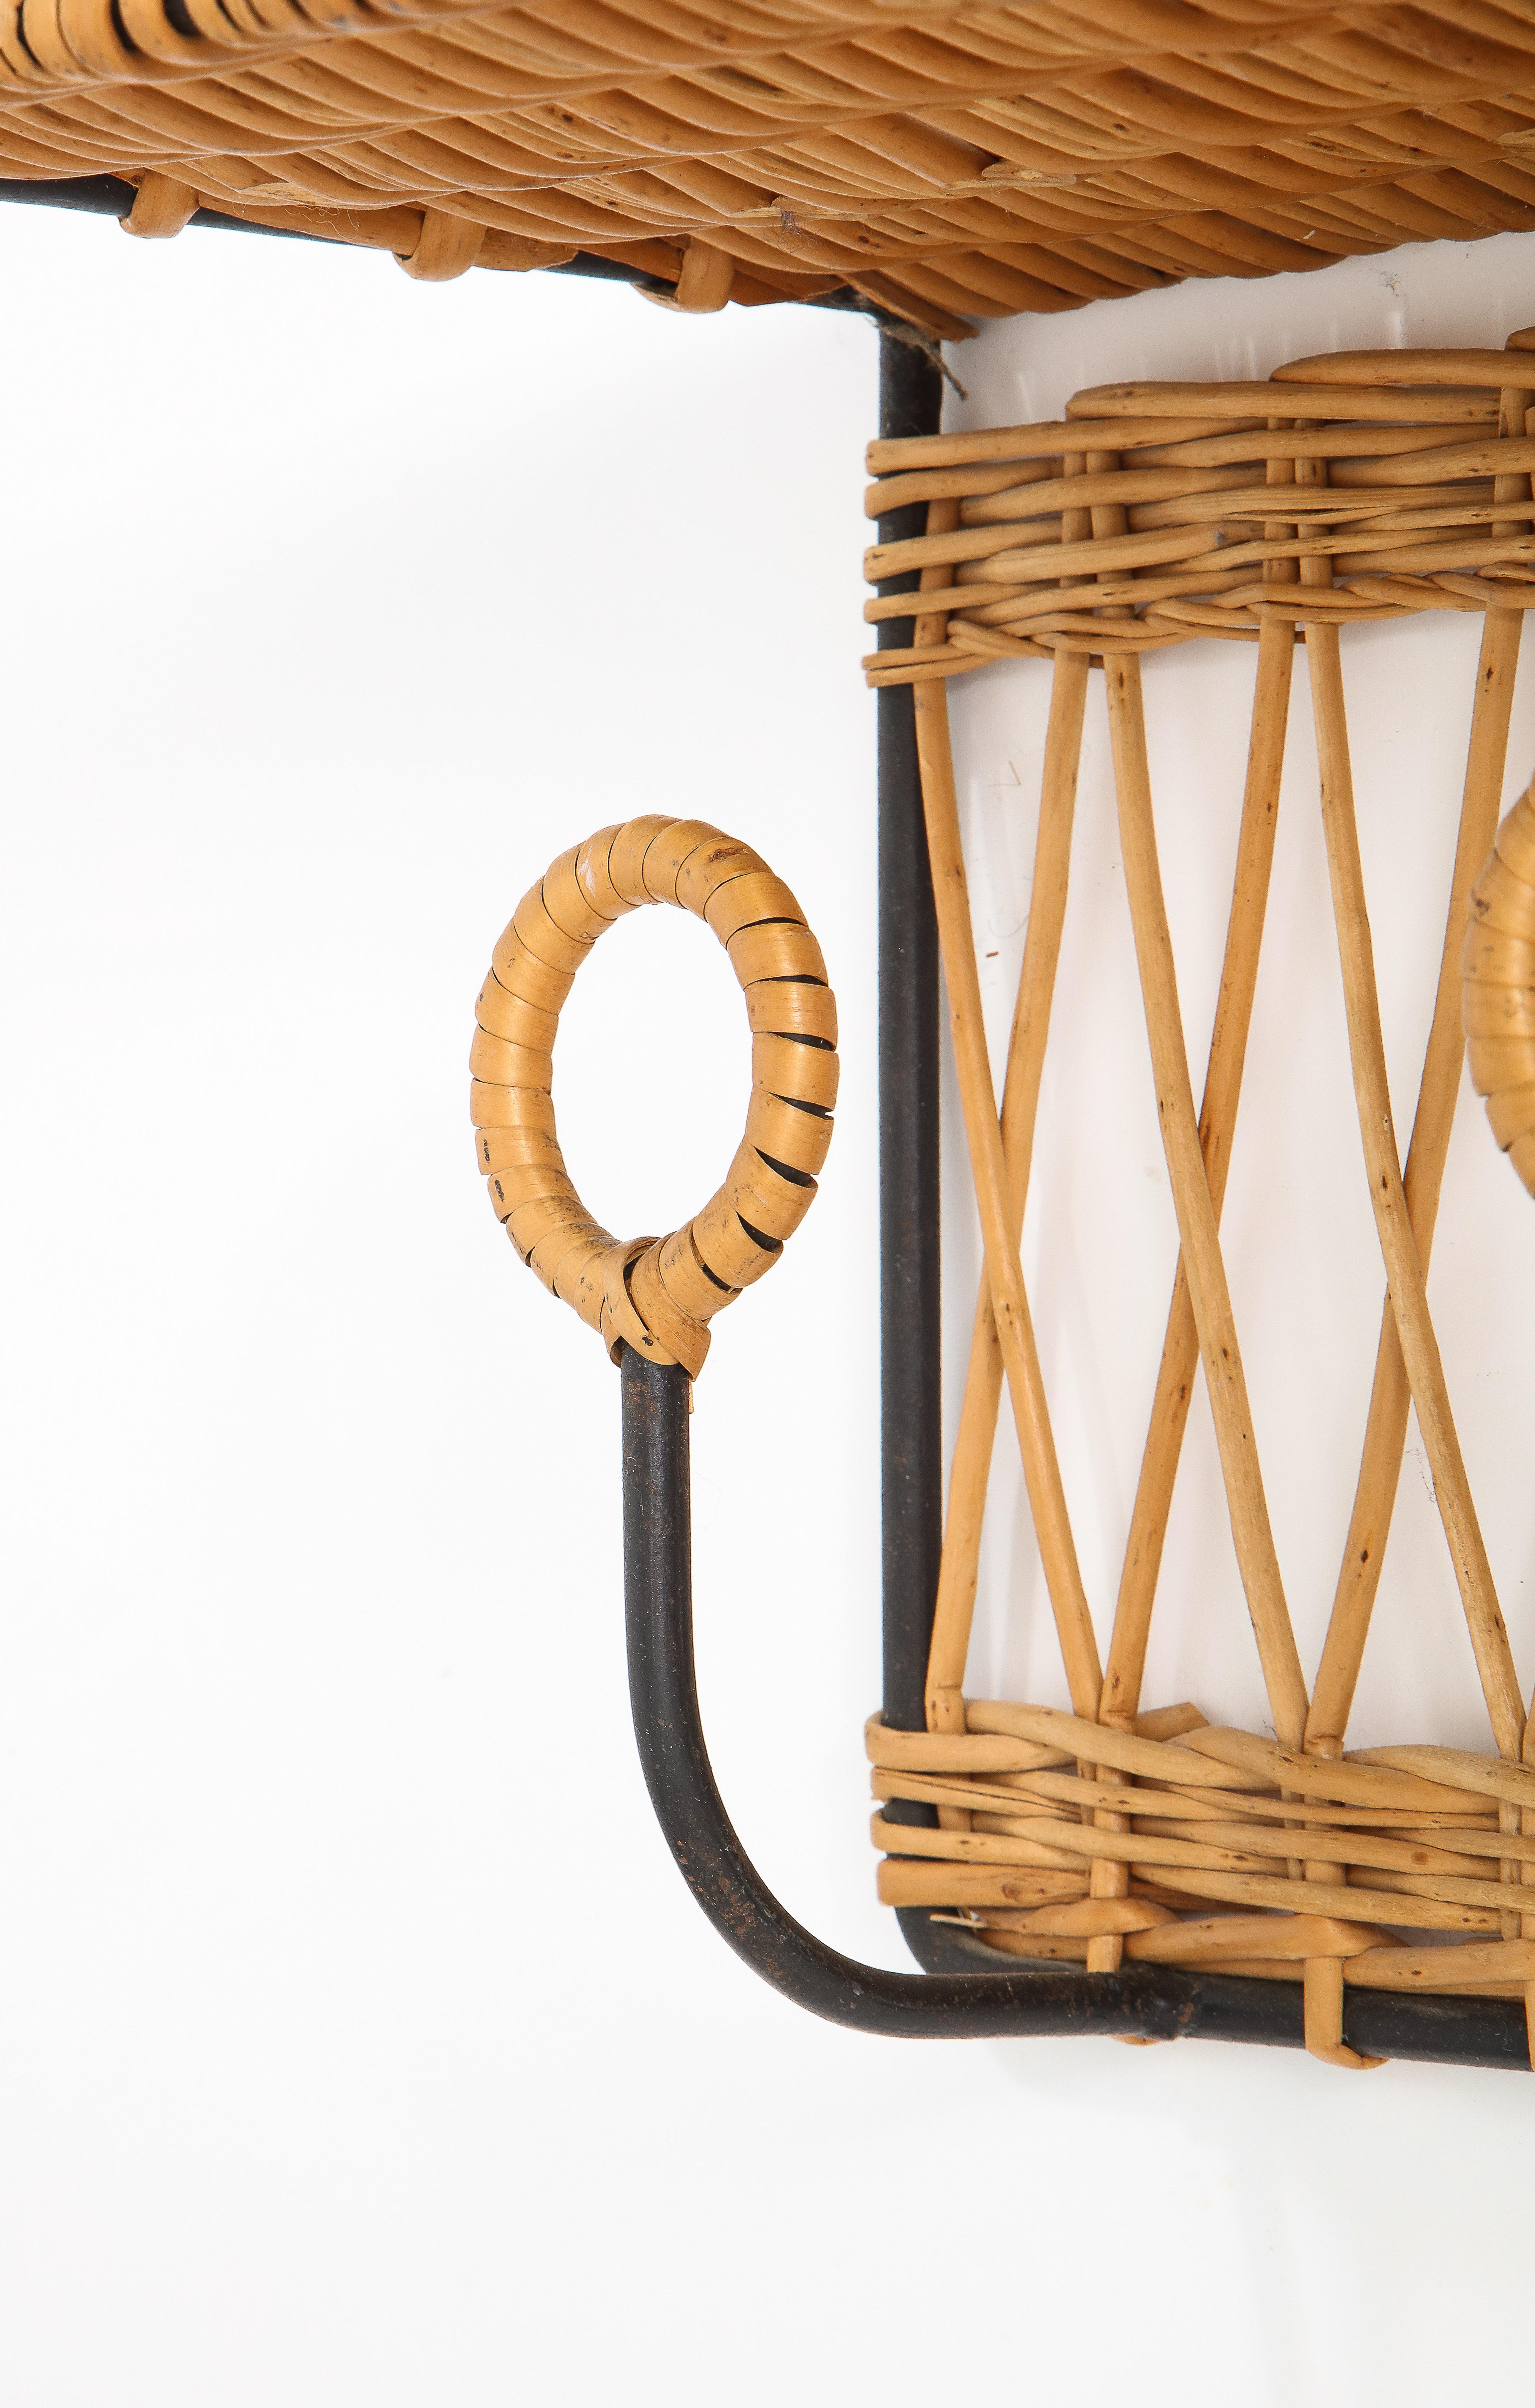 French Wicker Rattan & Wrought Iron Coatrack Shelf, France 1960's For Sale